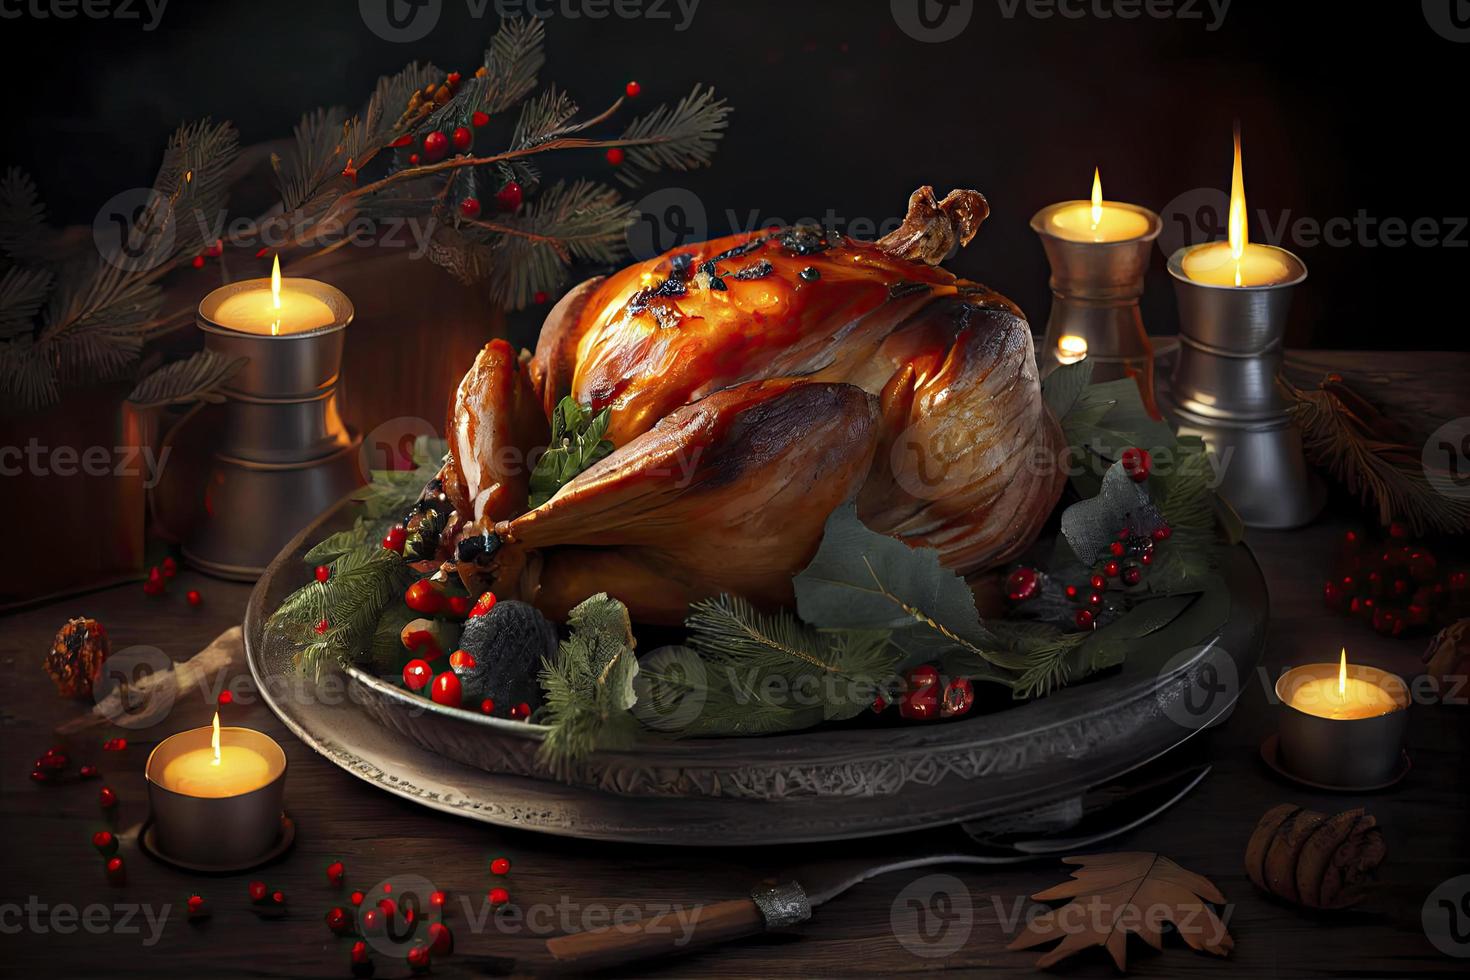 Christmas turkey dinner. Baked turkey garnished with red berries and sage leaves in front of Christmas tree and burning candles photo